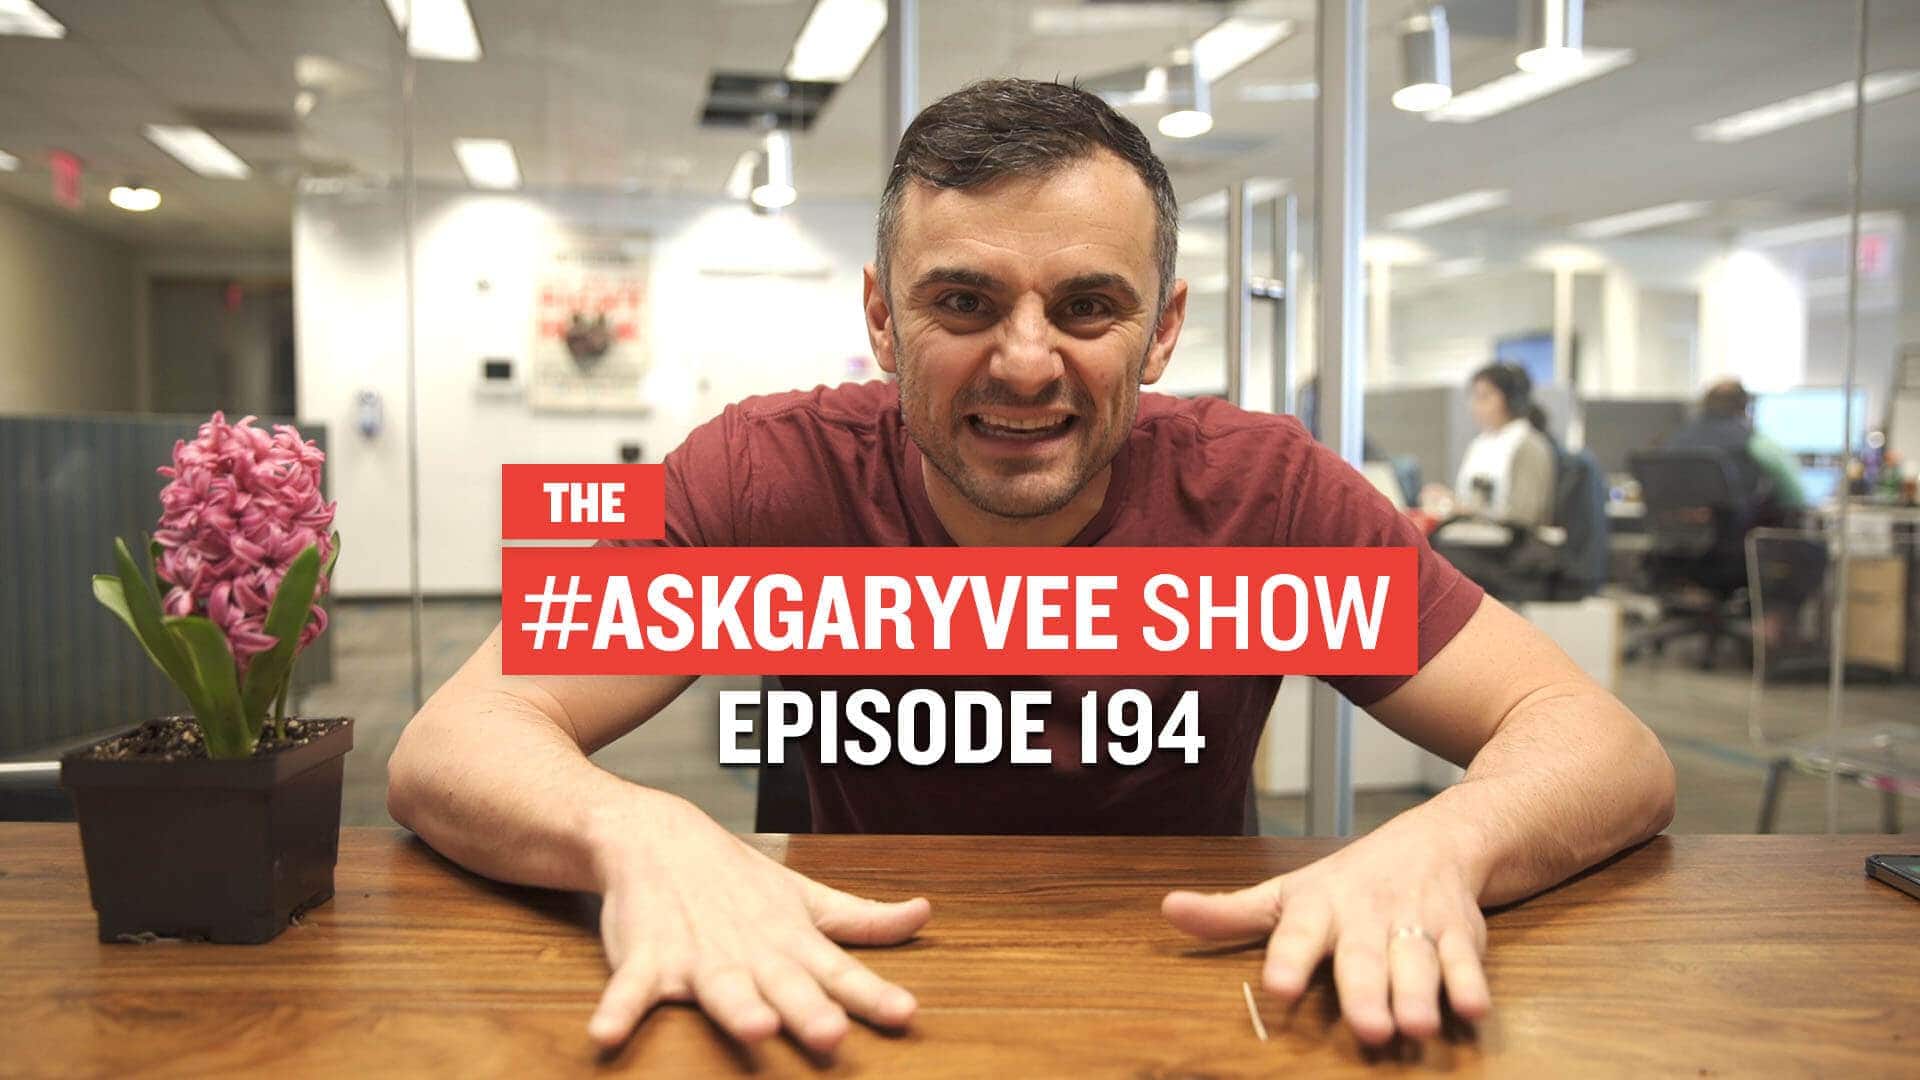 How to Sell Newspapers, Adopting Children & What Makes a Great Teacher | #AskGaryVee Episode 194